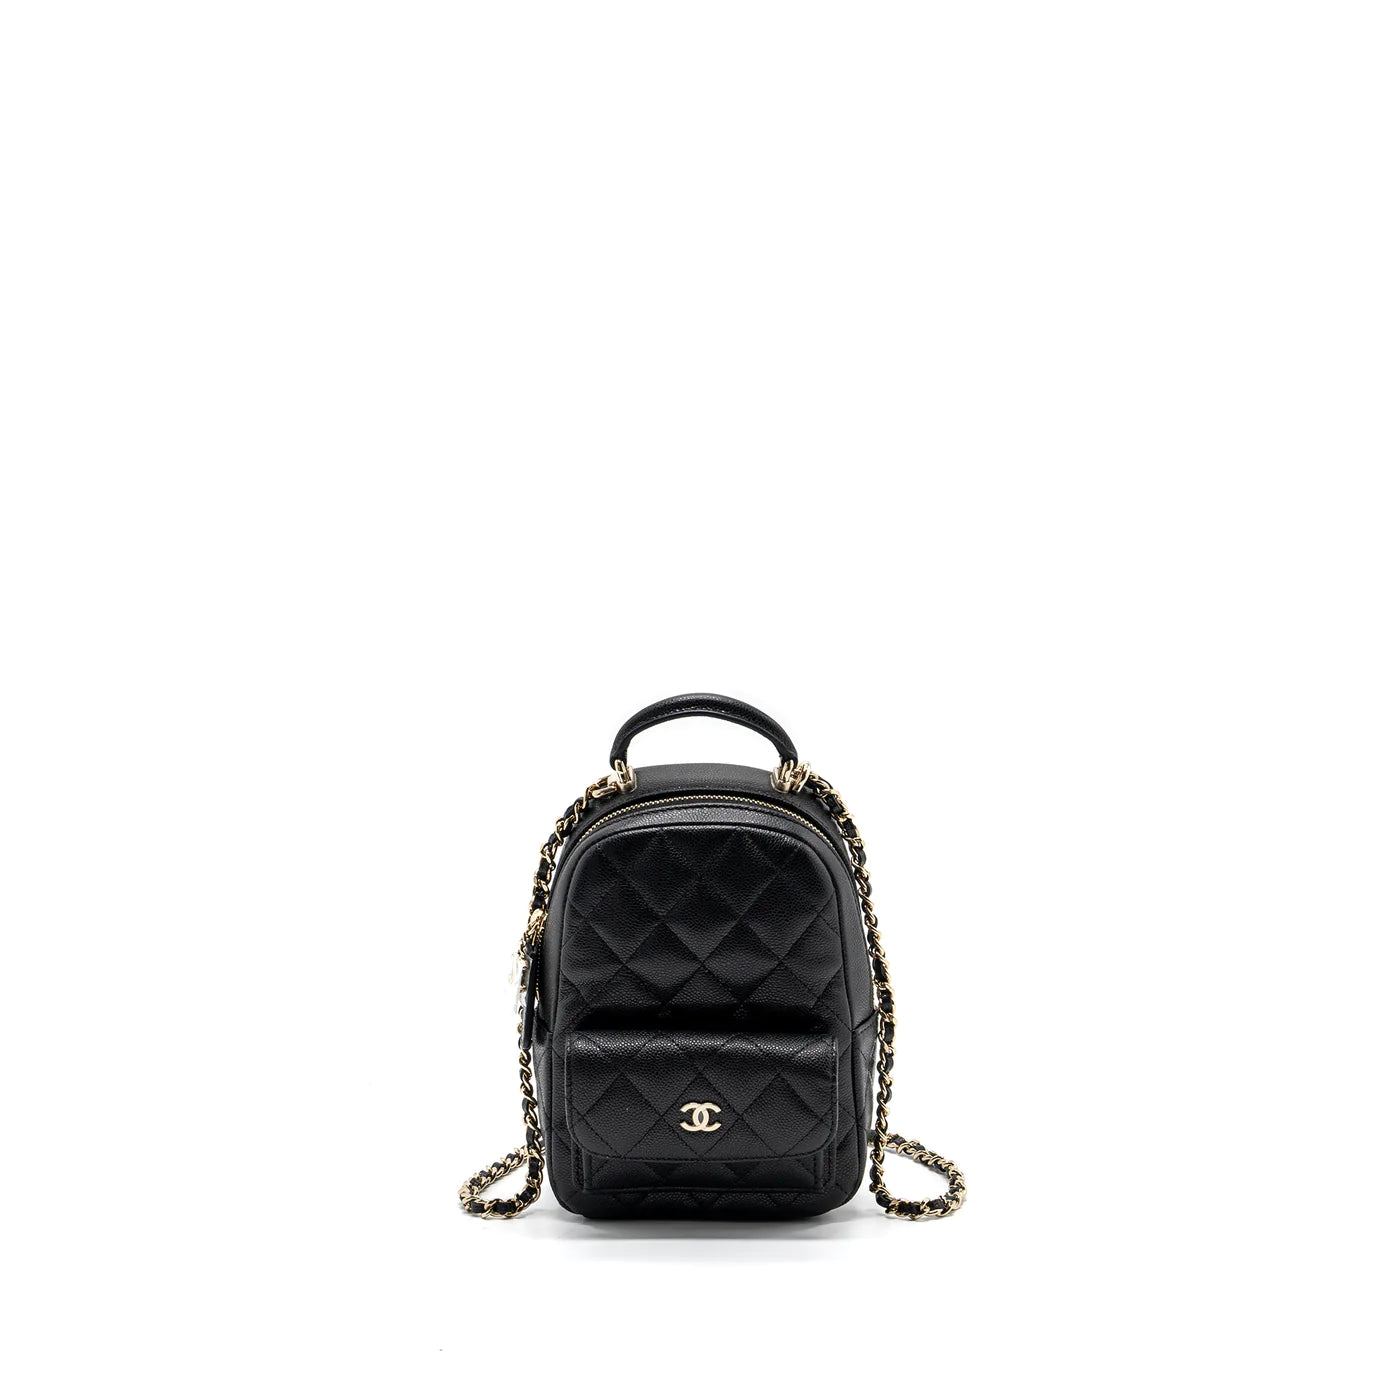 Luxury Quilted Leather Designer Mini Flap Backpack With CC Logo, Shoulder  And Cross Body Options, Card Holder, And Duma Mini Handbag For Women From  Designerbag1107, $64.57 | DHgate.Com